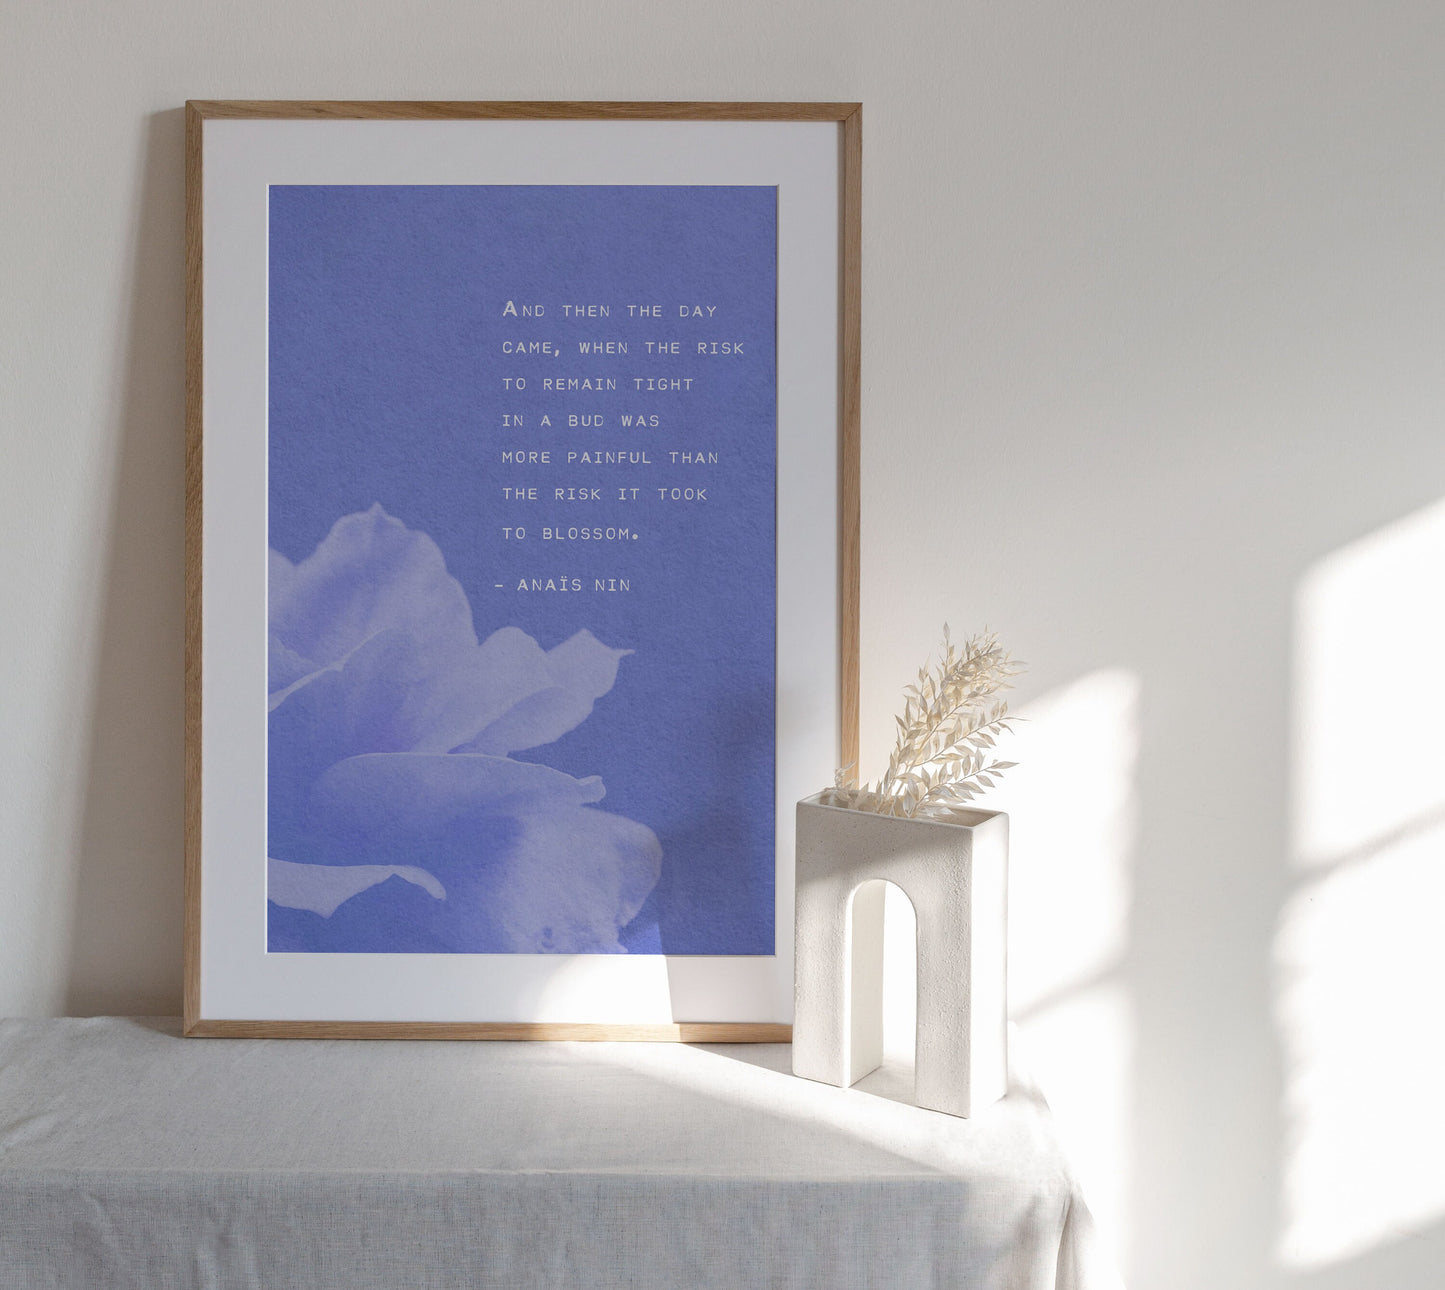 Anaïs Nin quote print "And then the day came, when the risk to remain tight in a bud was more painful than the risk it took to blossom"